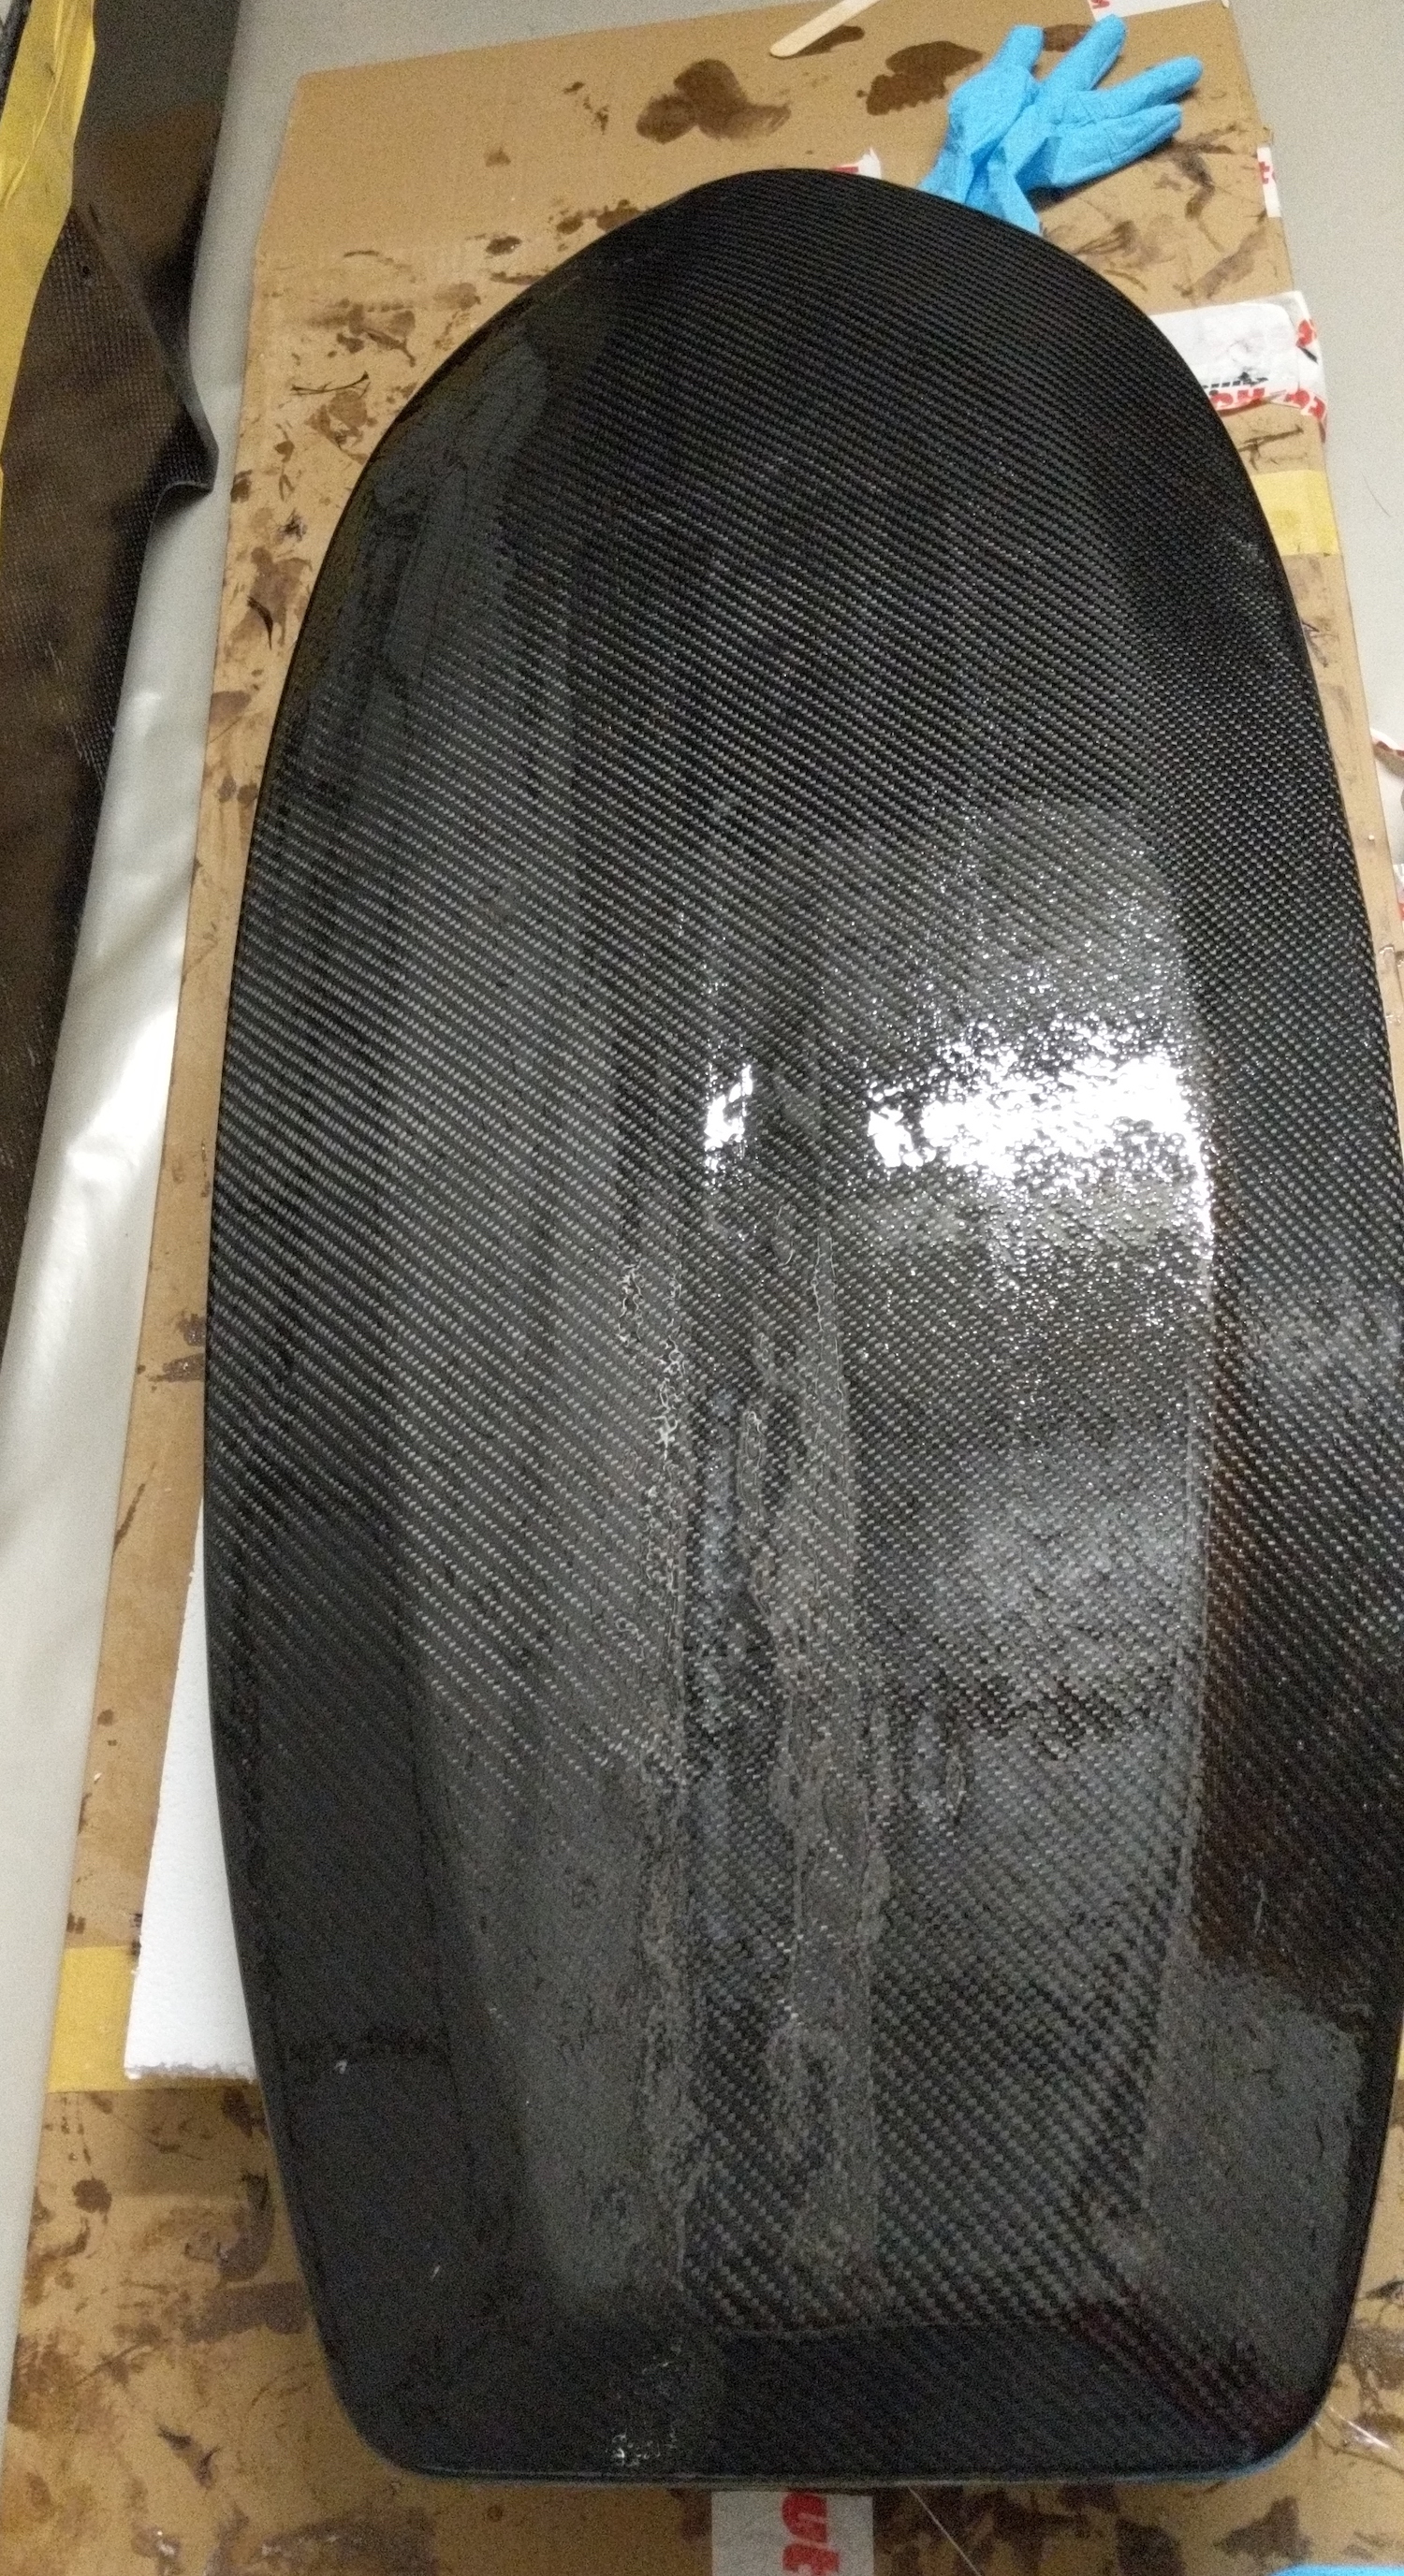 Carbon layer laminated to bottom of board.